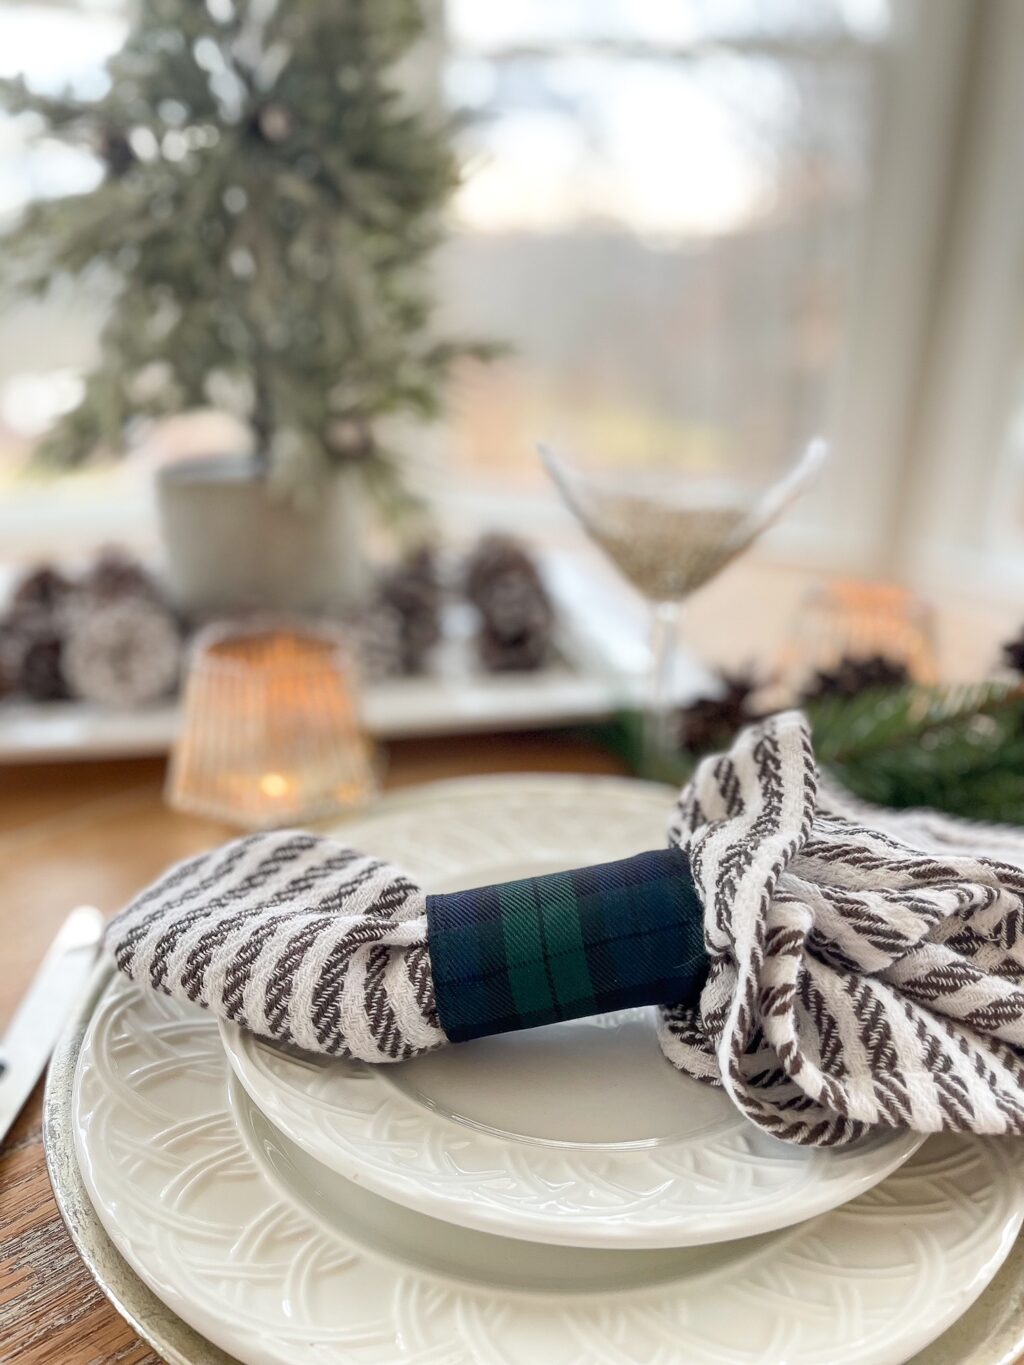 Tablescape using a DIY holiday napkin ring with blue plaid ribbon